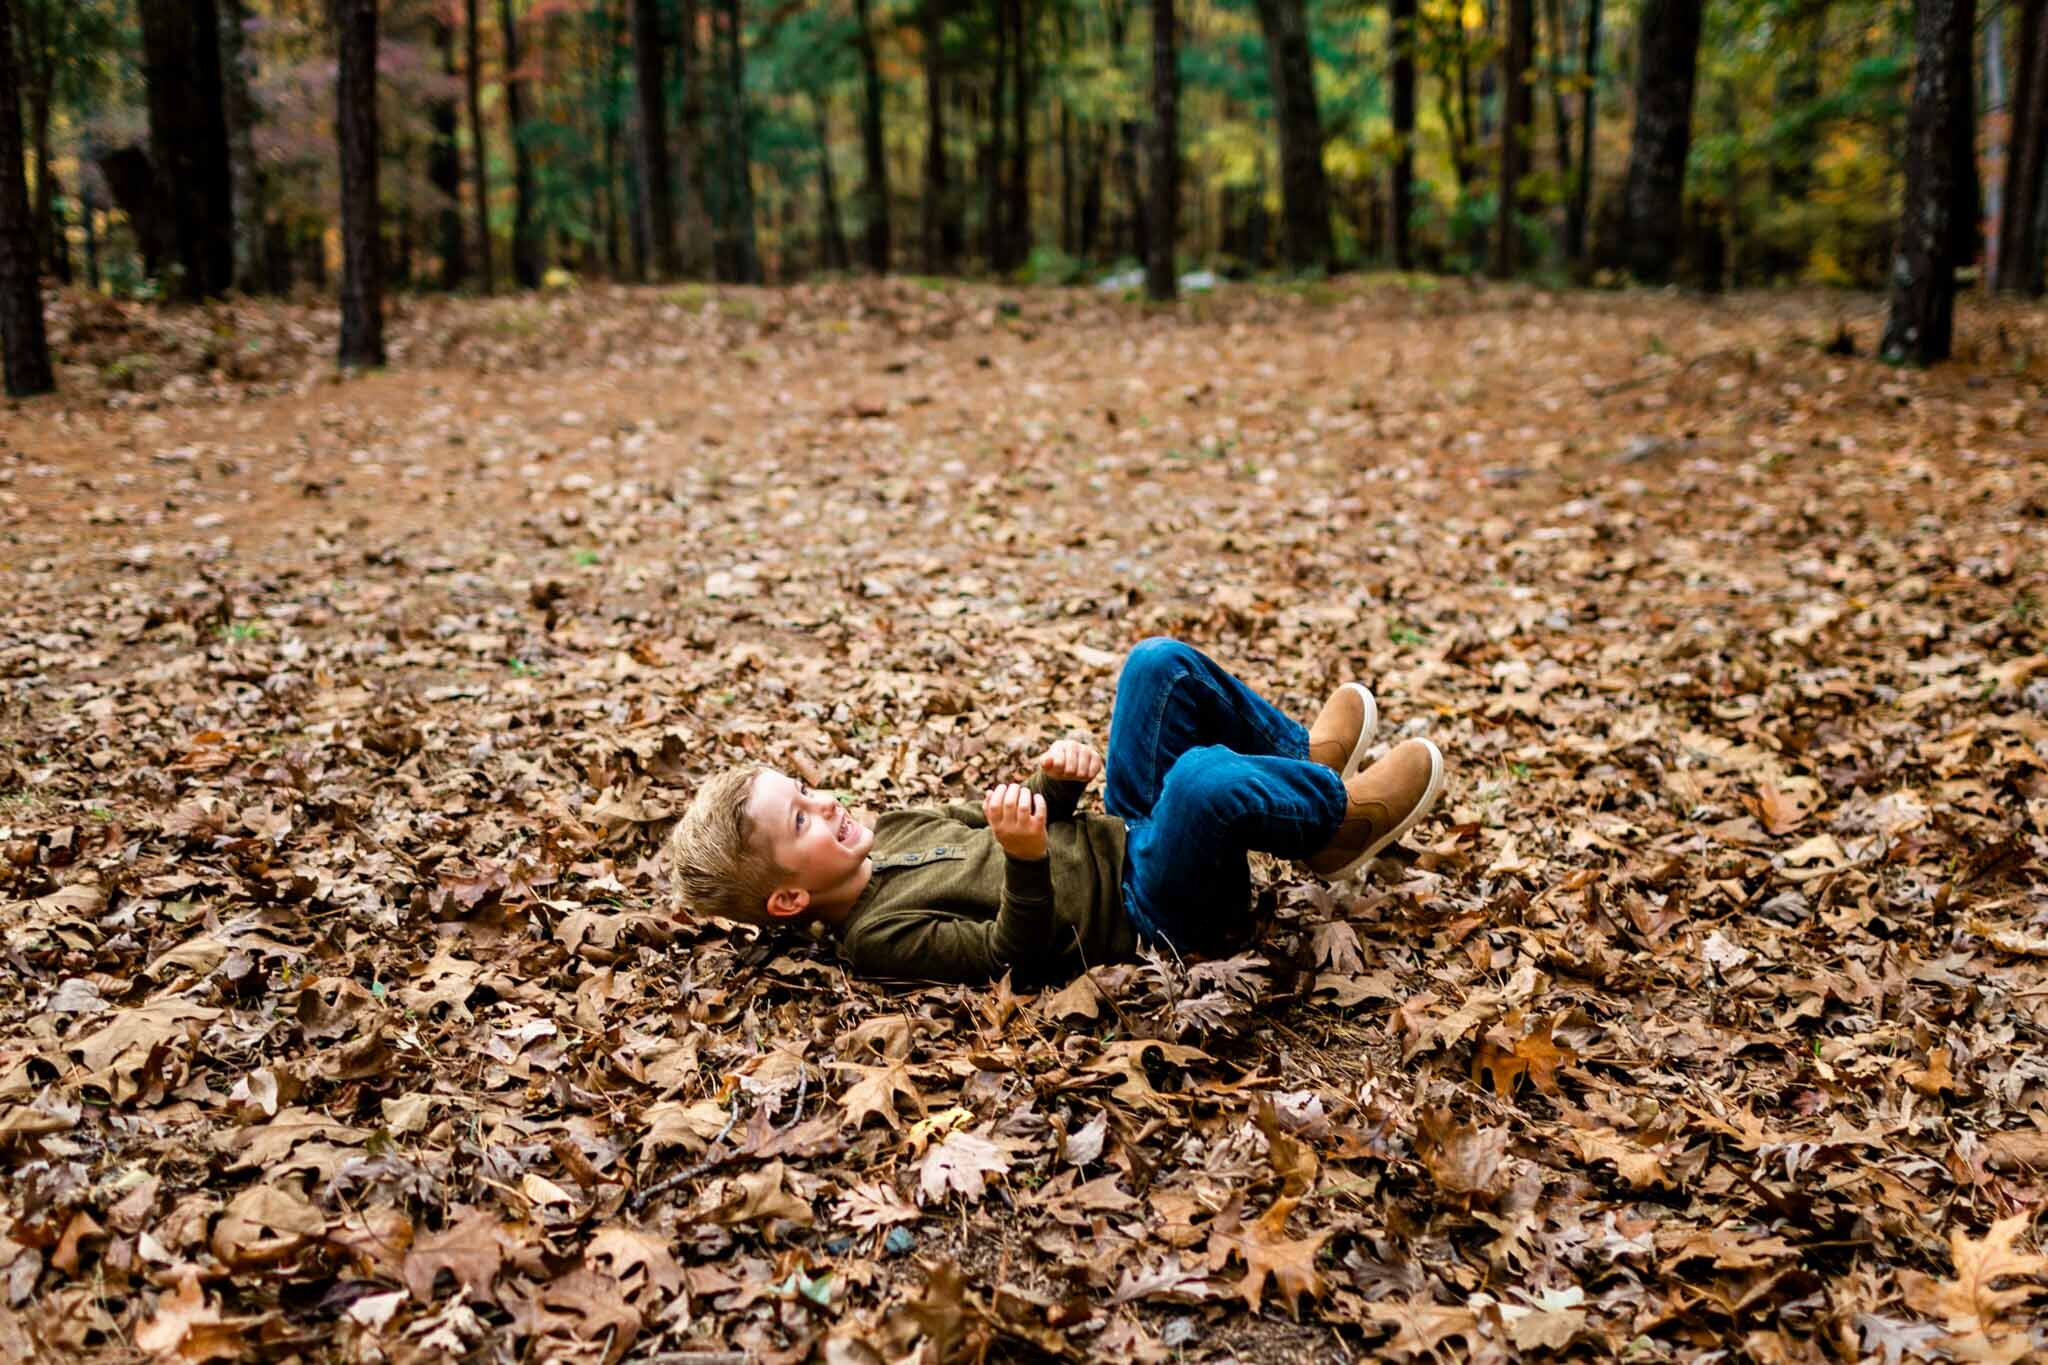 Raleigh Family Photographer at Umstead Park | By G. Lin Photography | Young boy rolling in pile of brown leaves